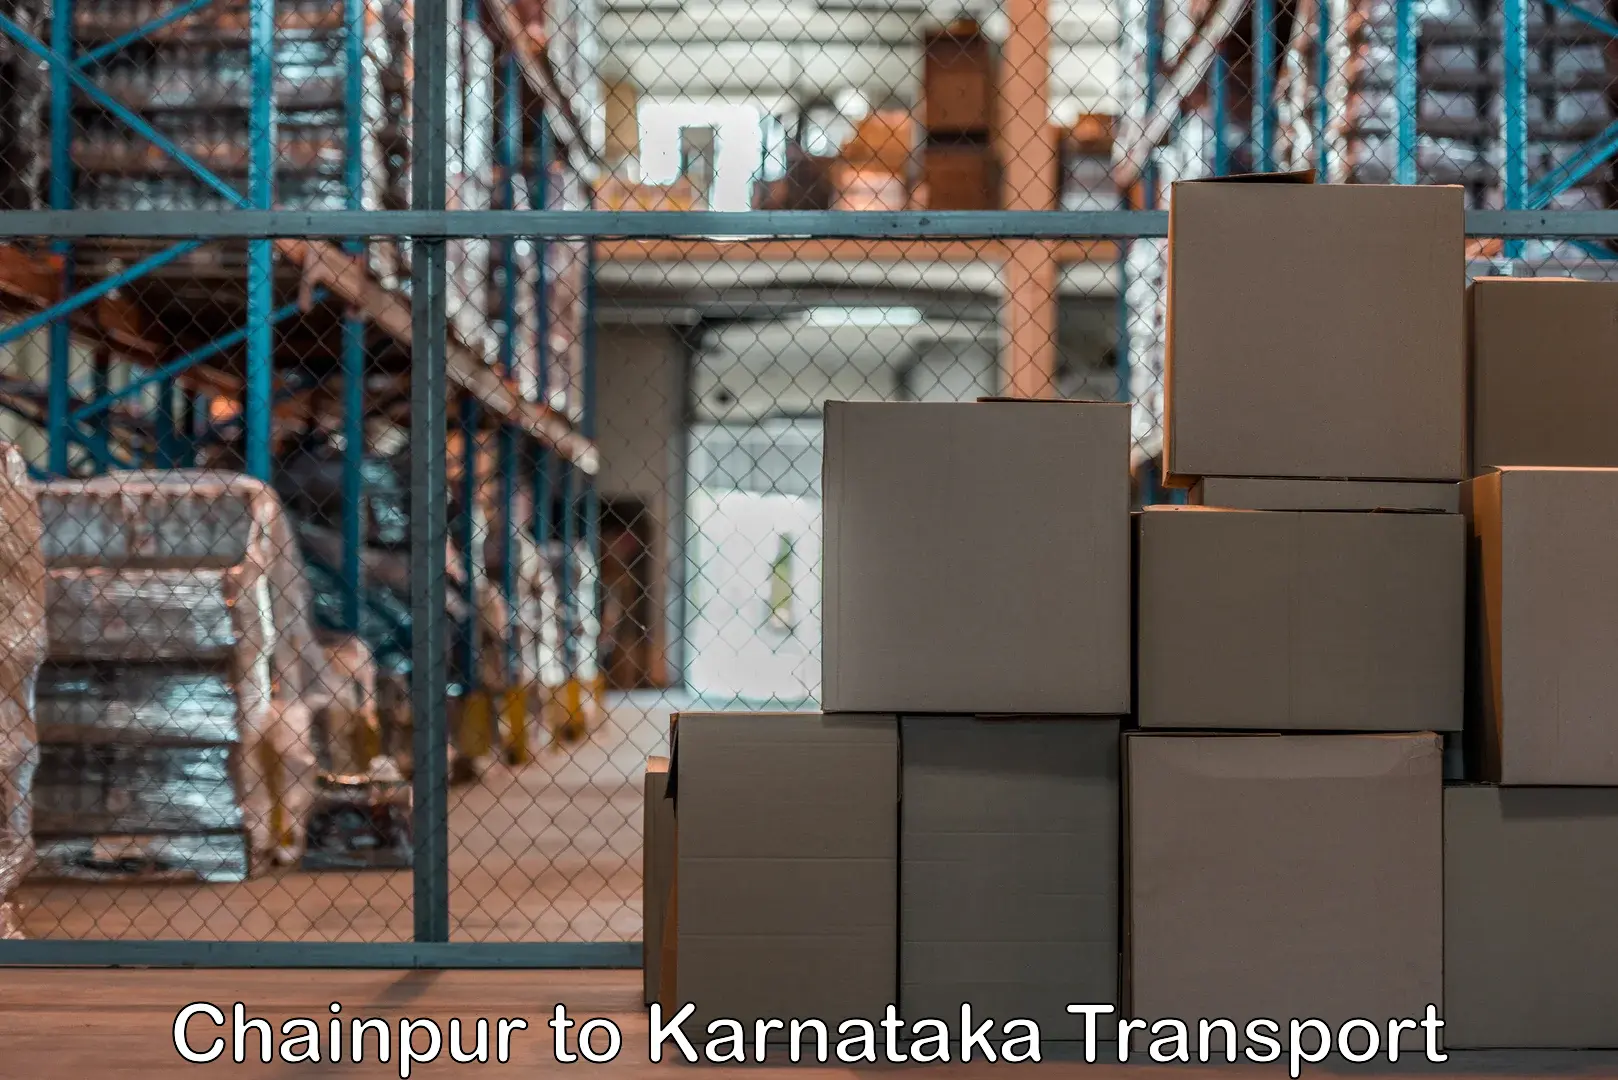 Truck transport companies in India in Chainpur to Siruguppa